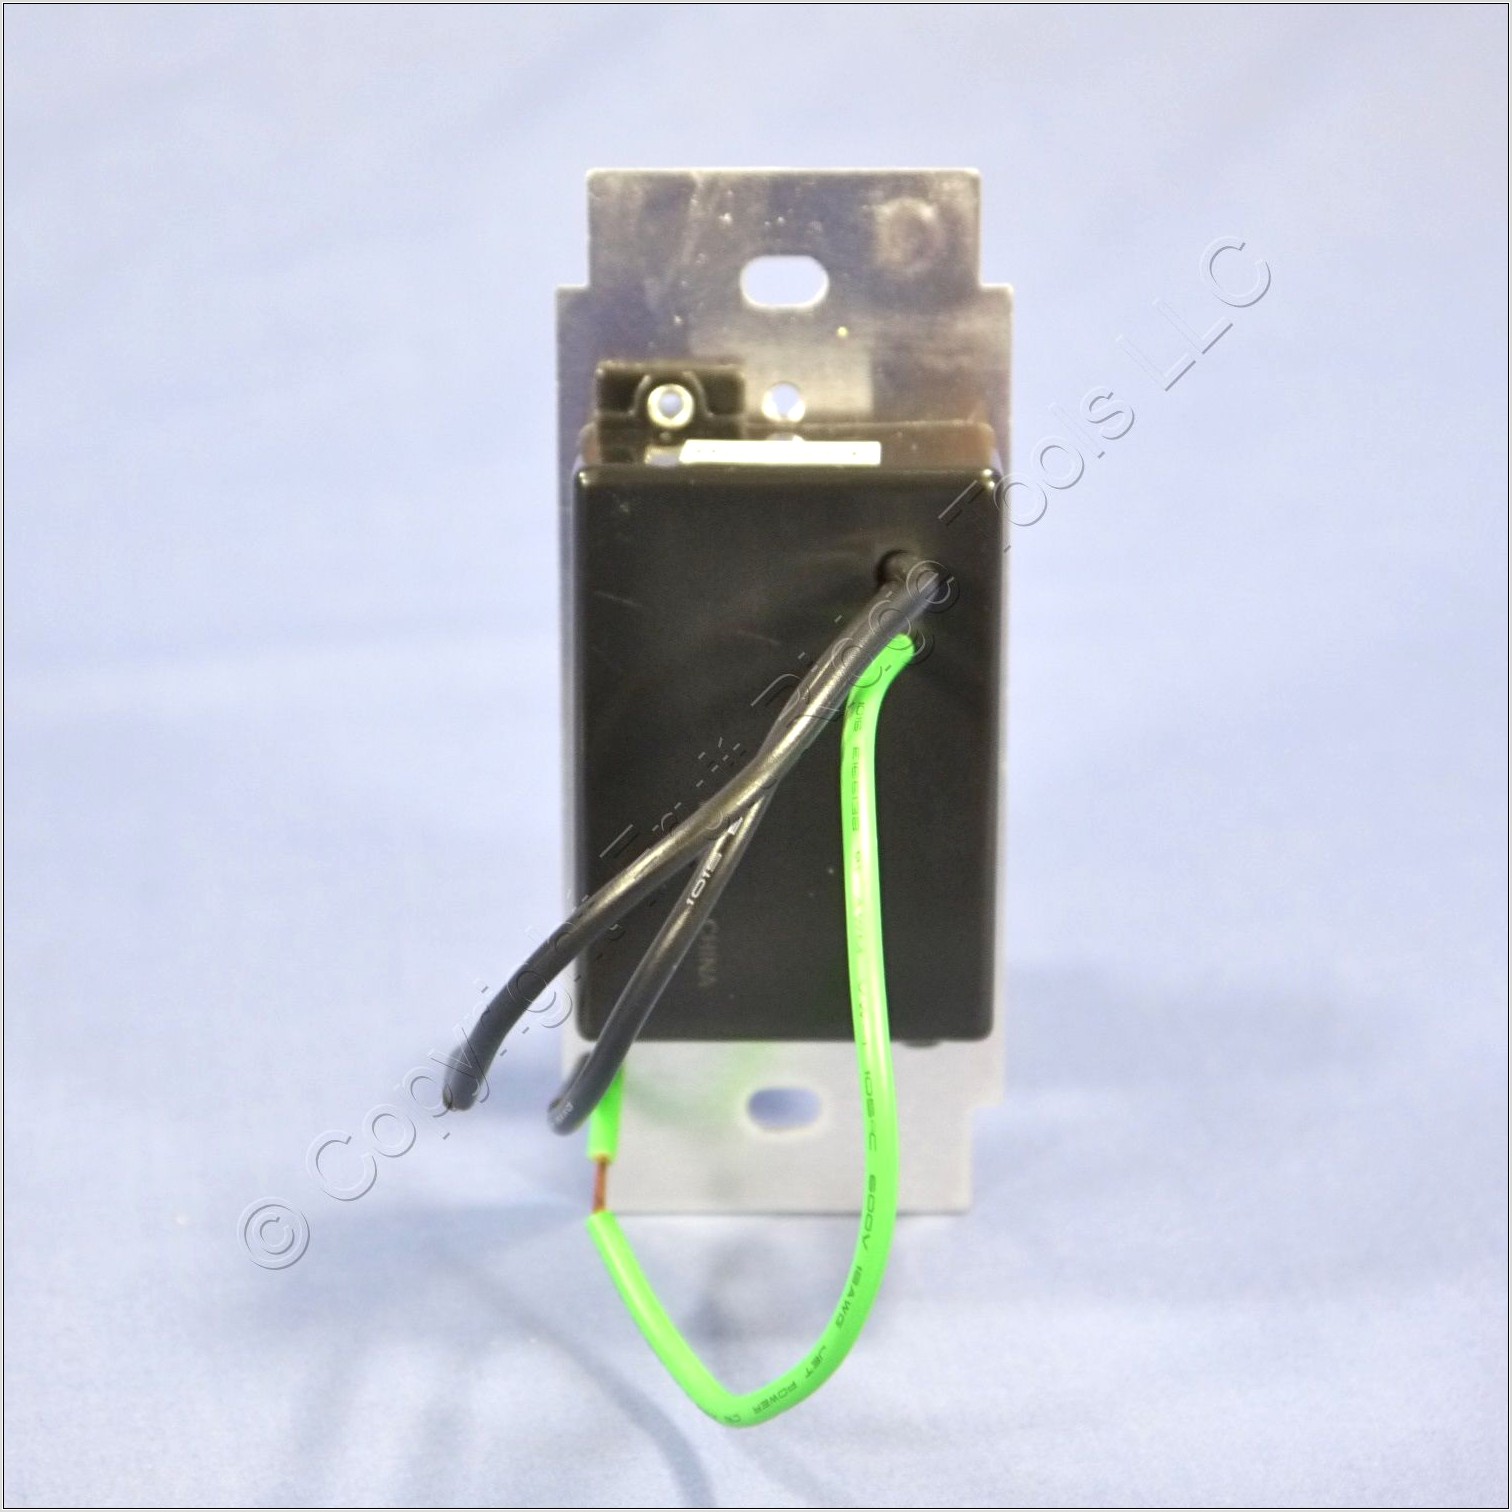 Leviton Rotary Dimmer Switch Wiring Diagram